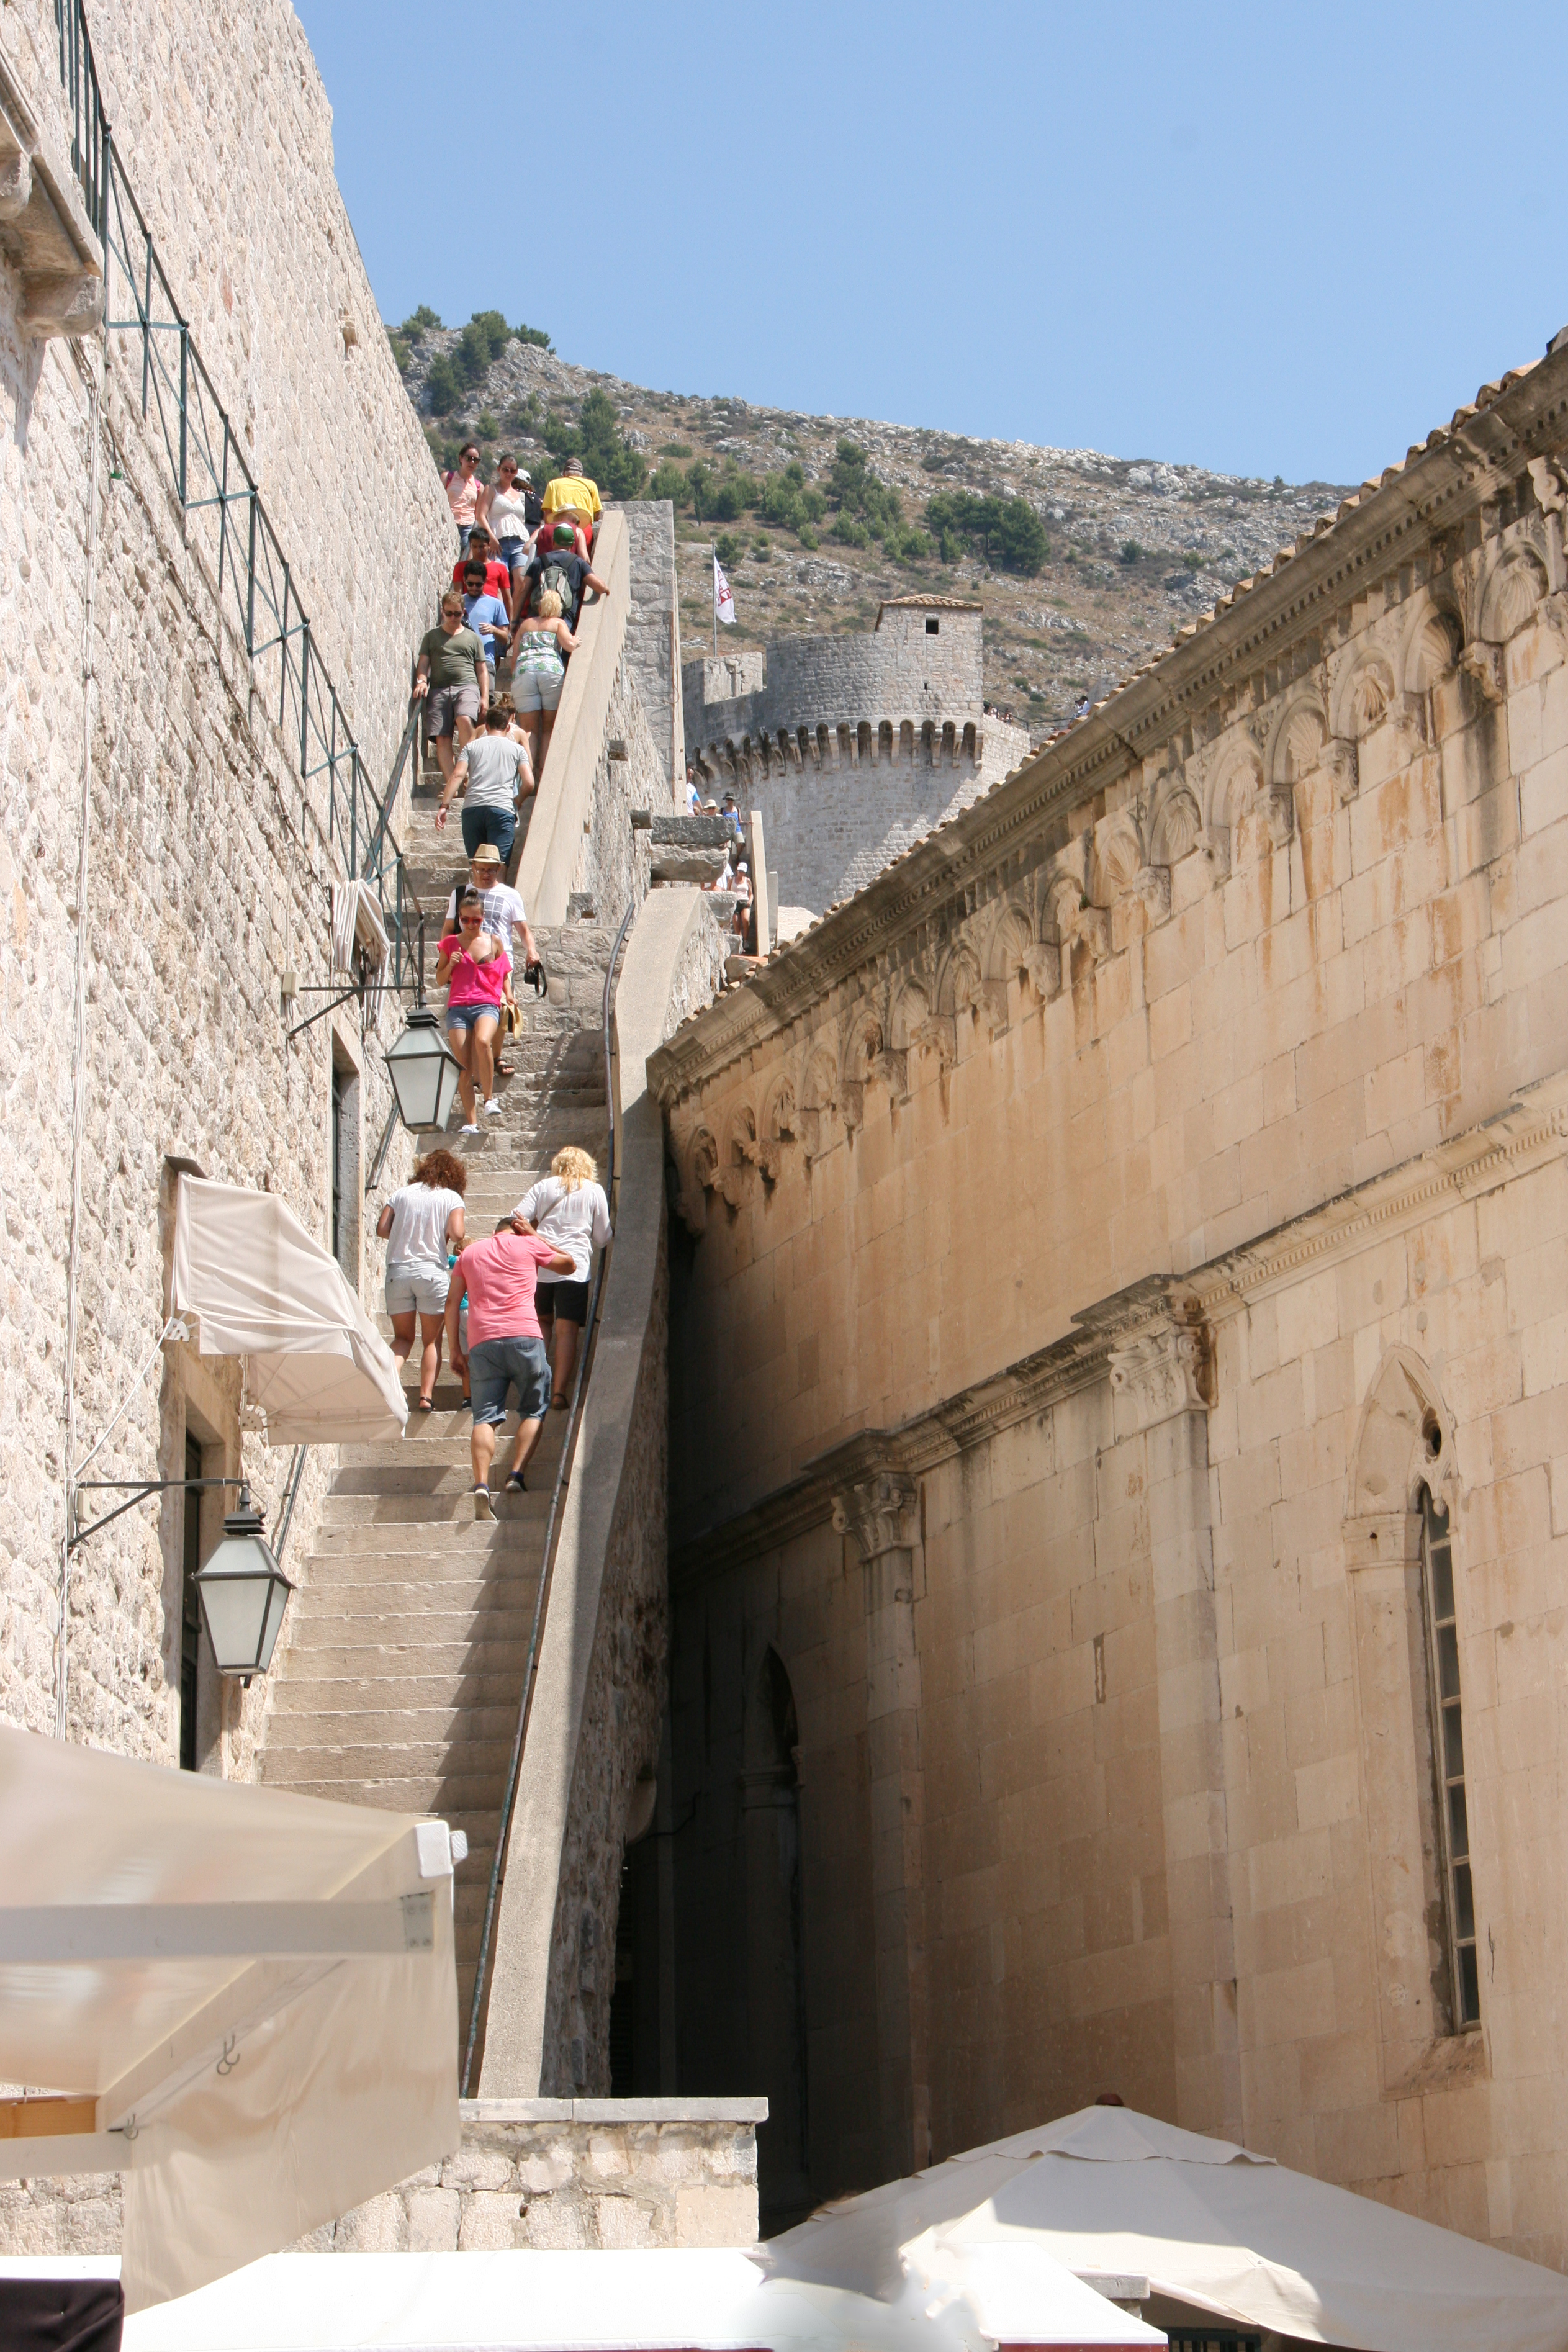 The steep stair you must climb to go up to the city walls.